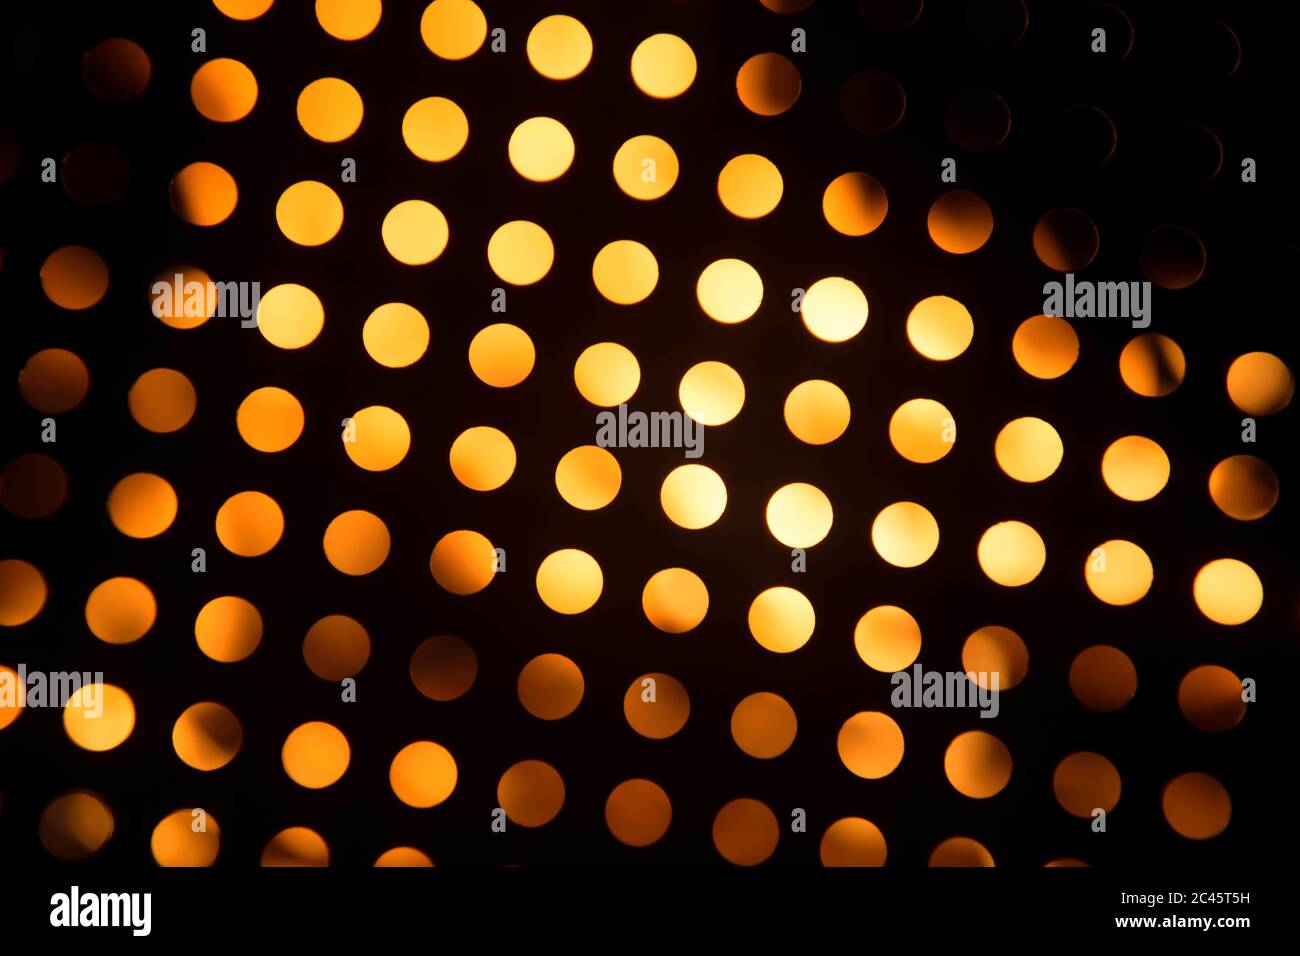 Metal surface with holes on a blurred orange background Stock Photo